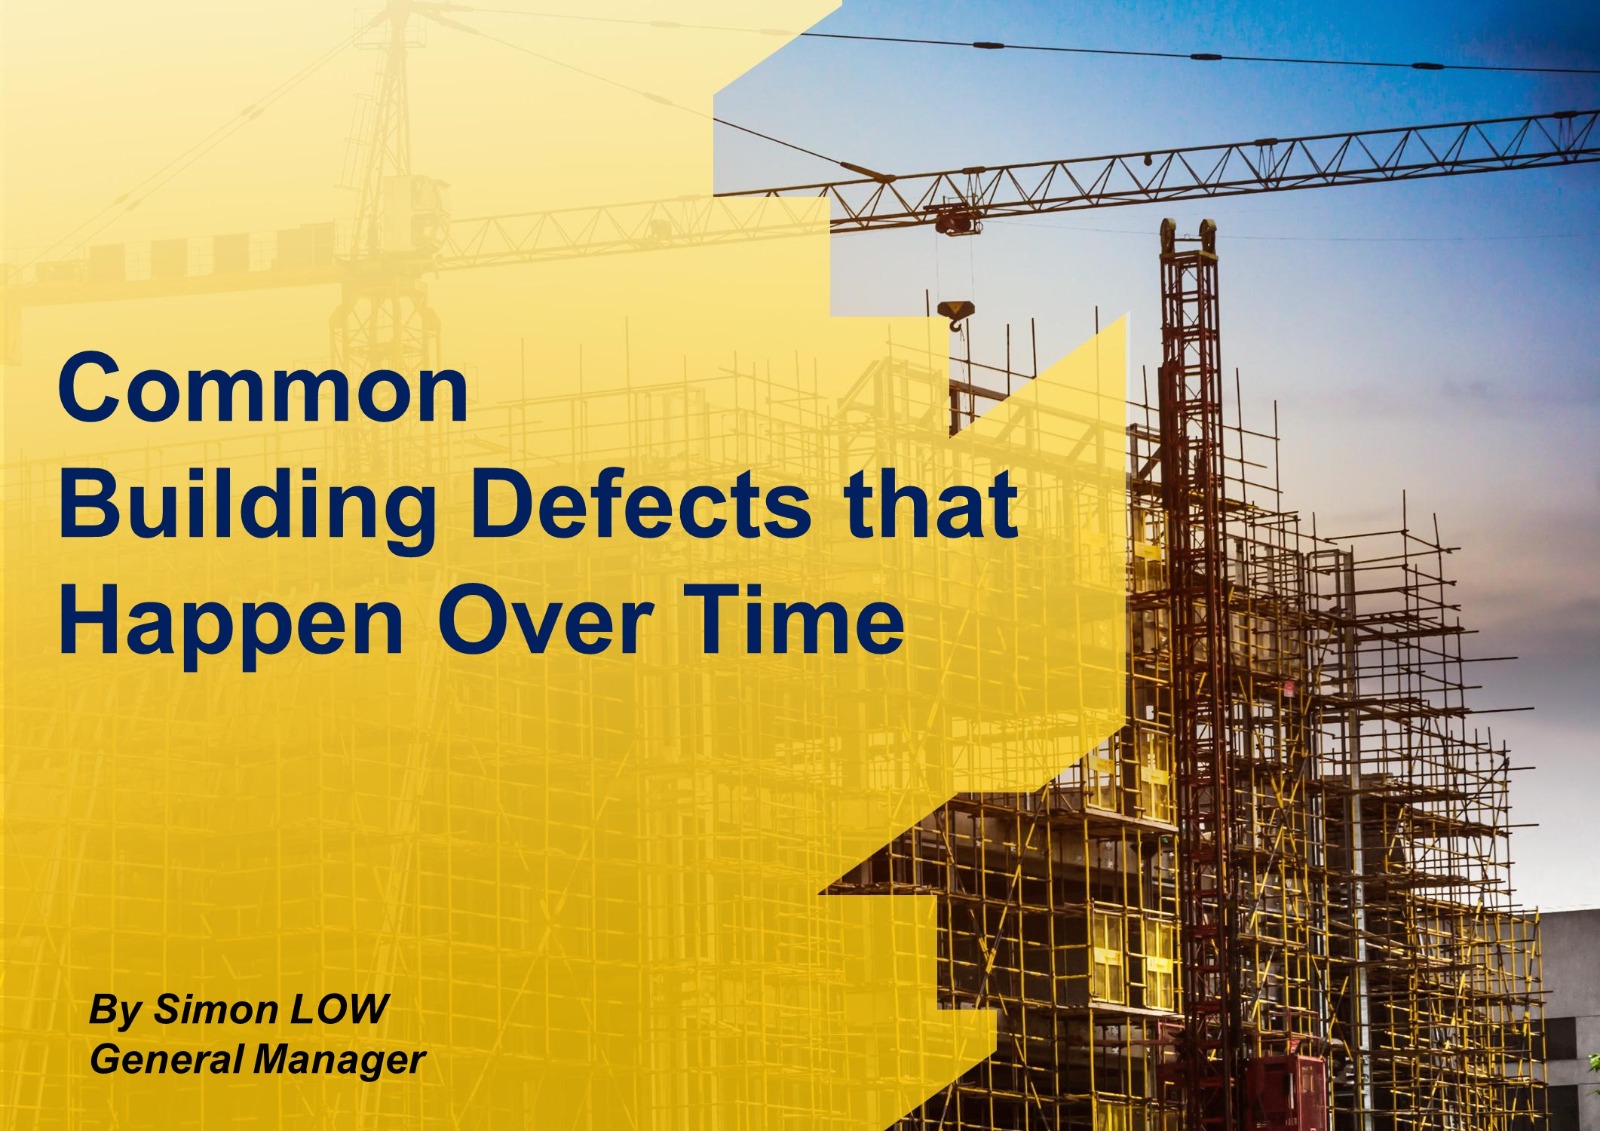 Common Building Defects that Happen Over Time